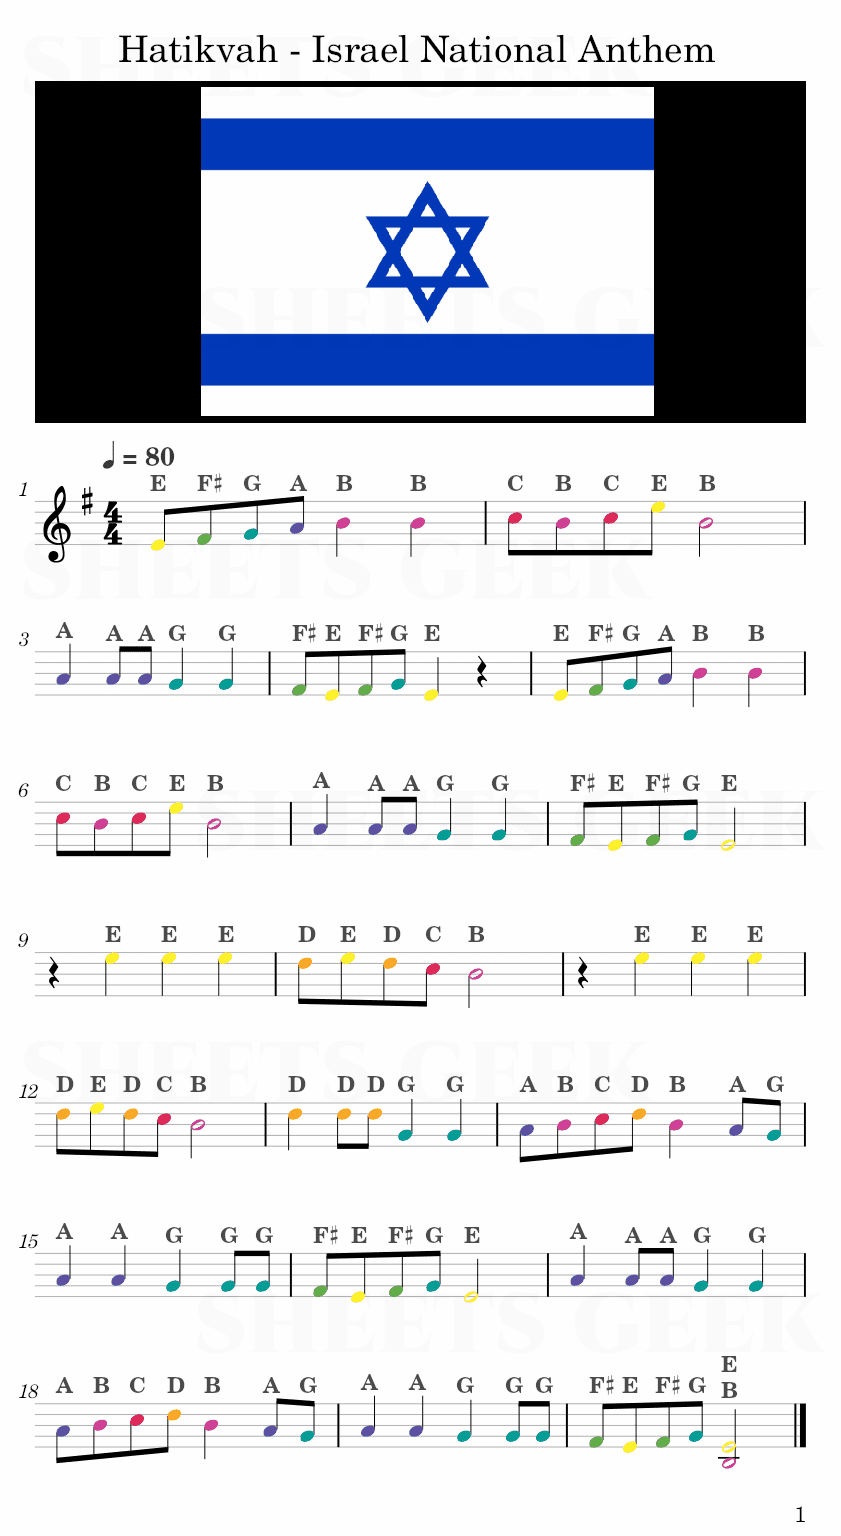 Hatikvah - Israel National Anthem Easy Sheet Music Free for piano, keyboard, flute, violin, sax, cello page 1